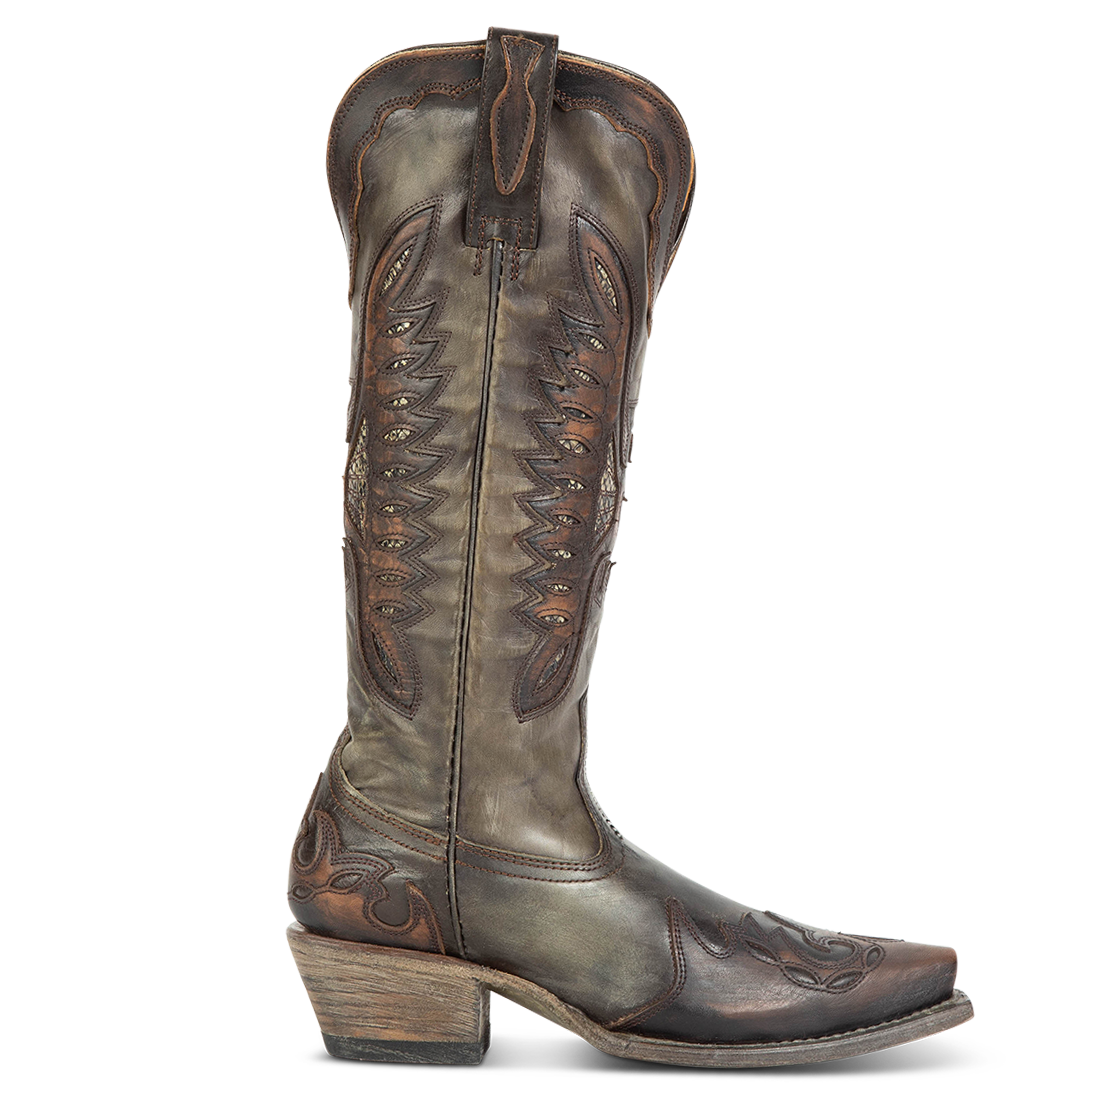 FREEBIRD women's Willie green multi leather western boot with textured design, stitch detailing, and snip toe construction